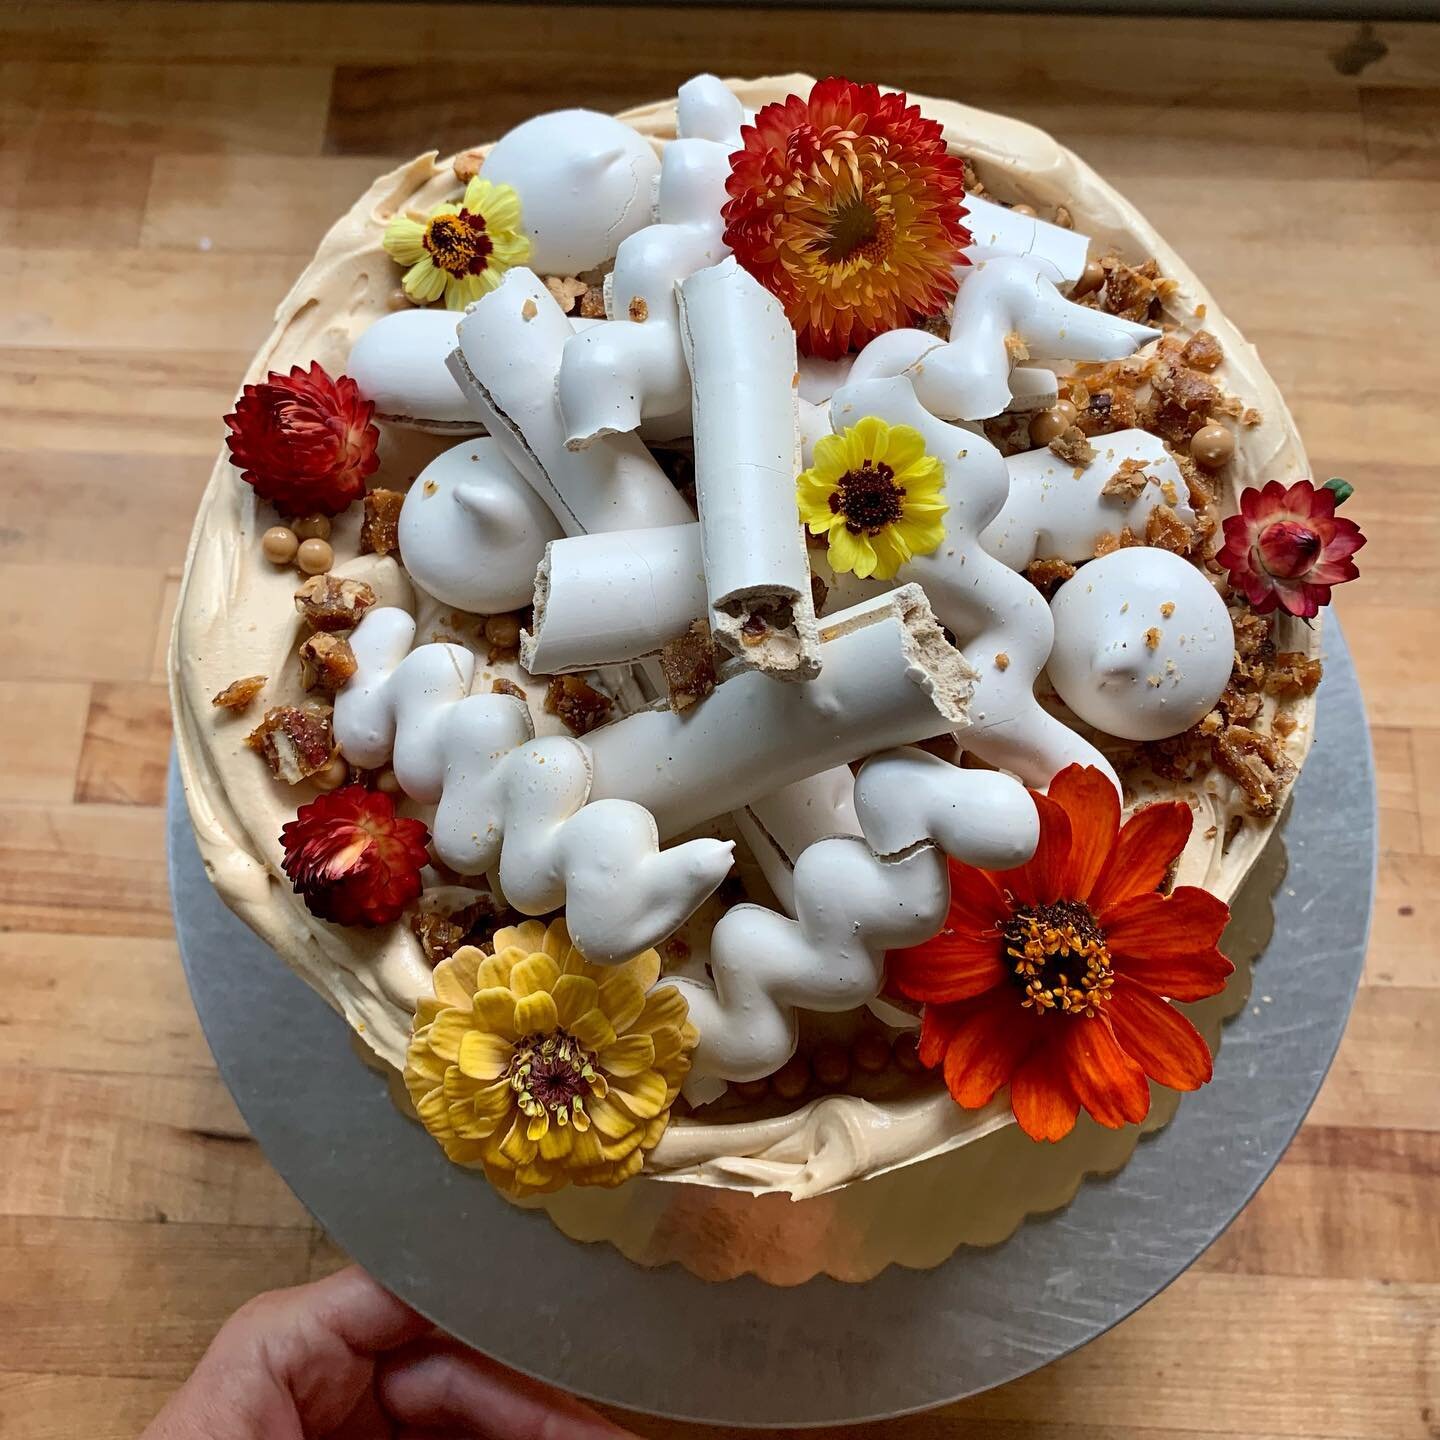 Coffee Toffee Cake with meringue decor heavily inspired by @sashimi1 
This combo is maybe my favorite cake I&rsquo;ve ever made? It&rsquo;s layers of malted vanilla chiffon, soaked in salty butterscotch sauce, filled with cafe au lait custard and cho